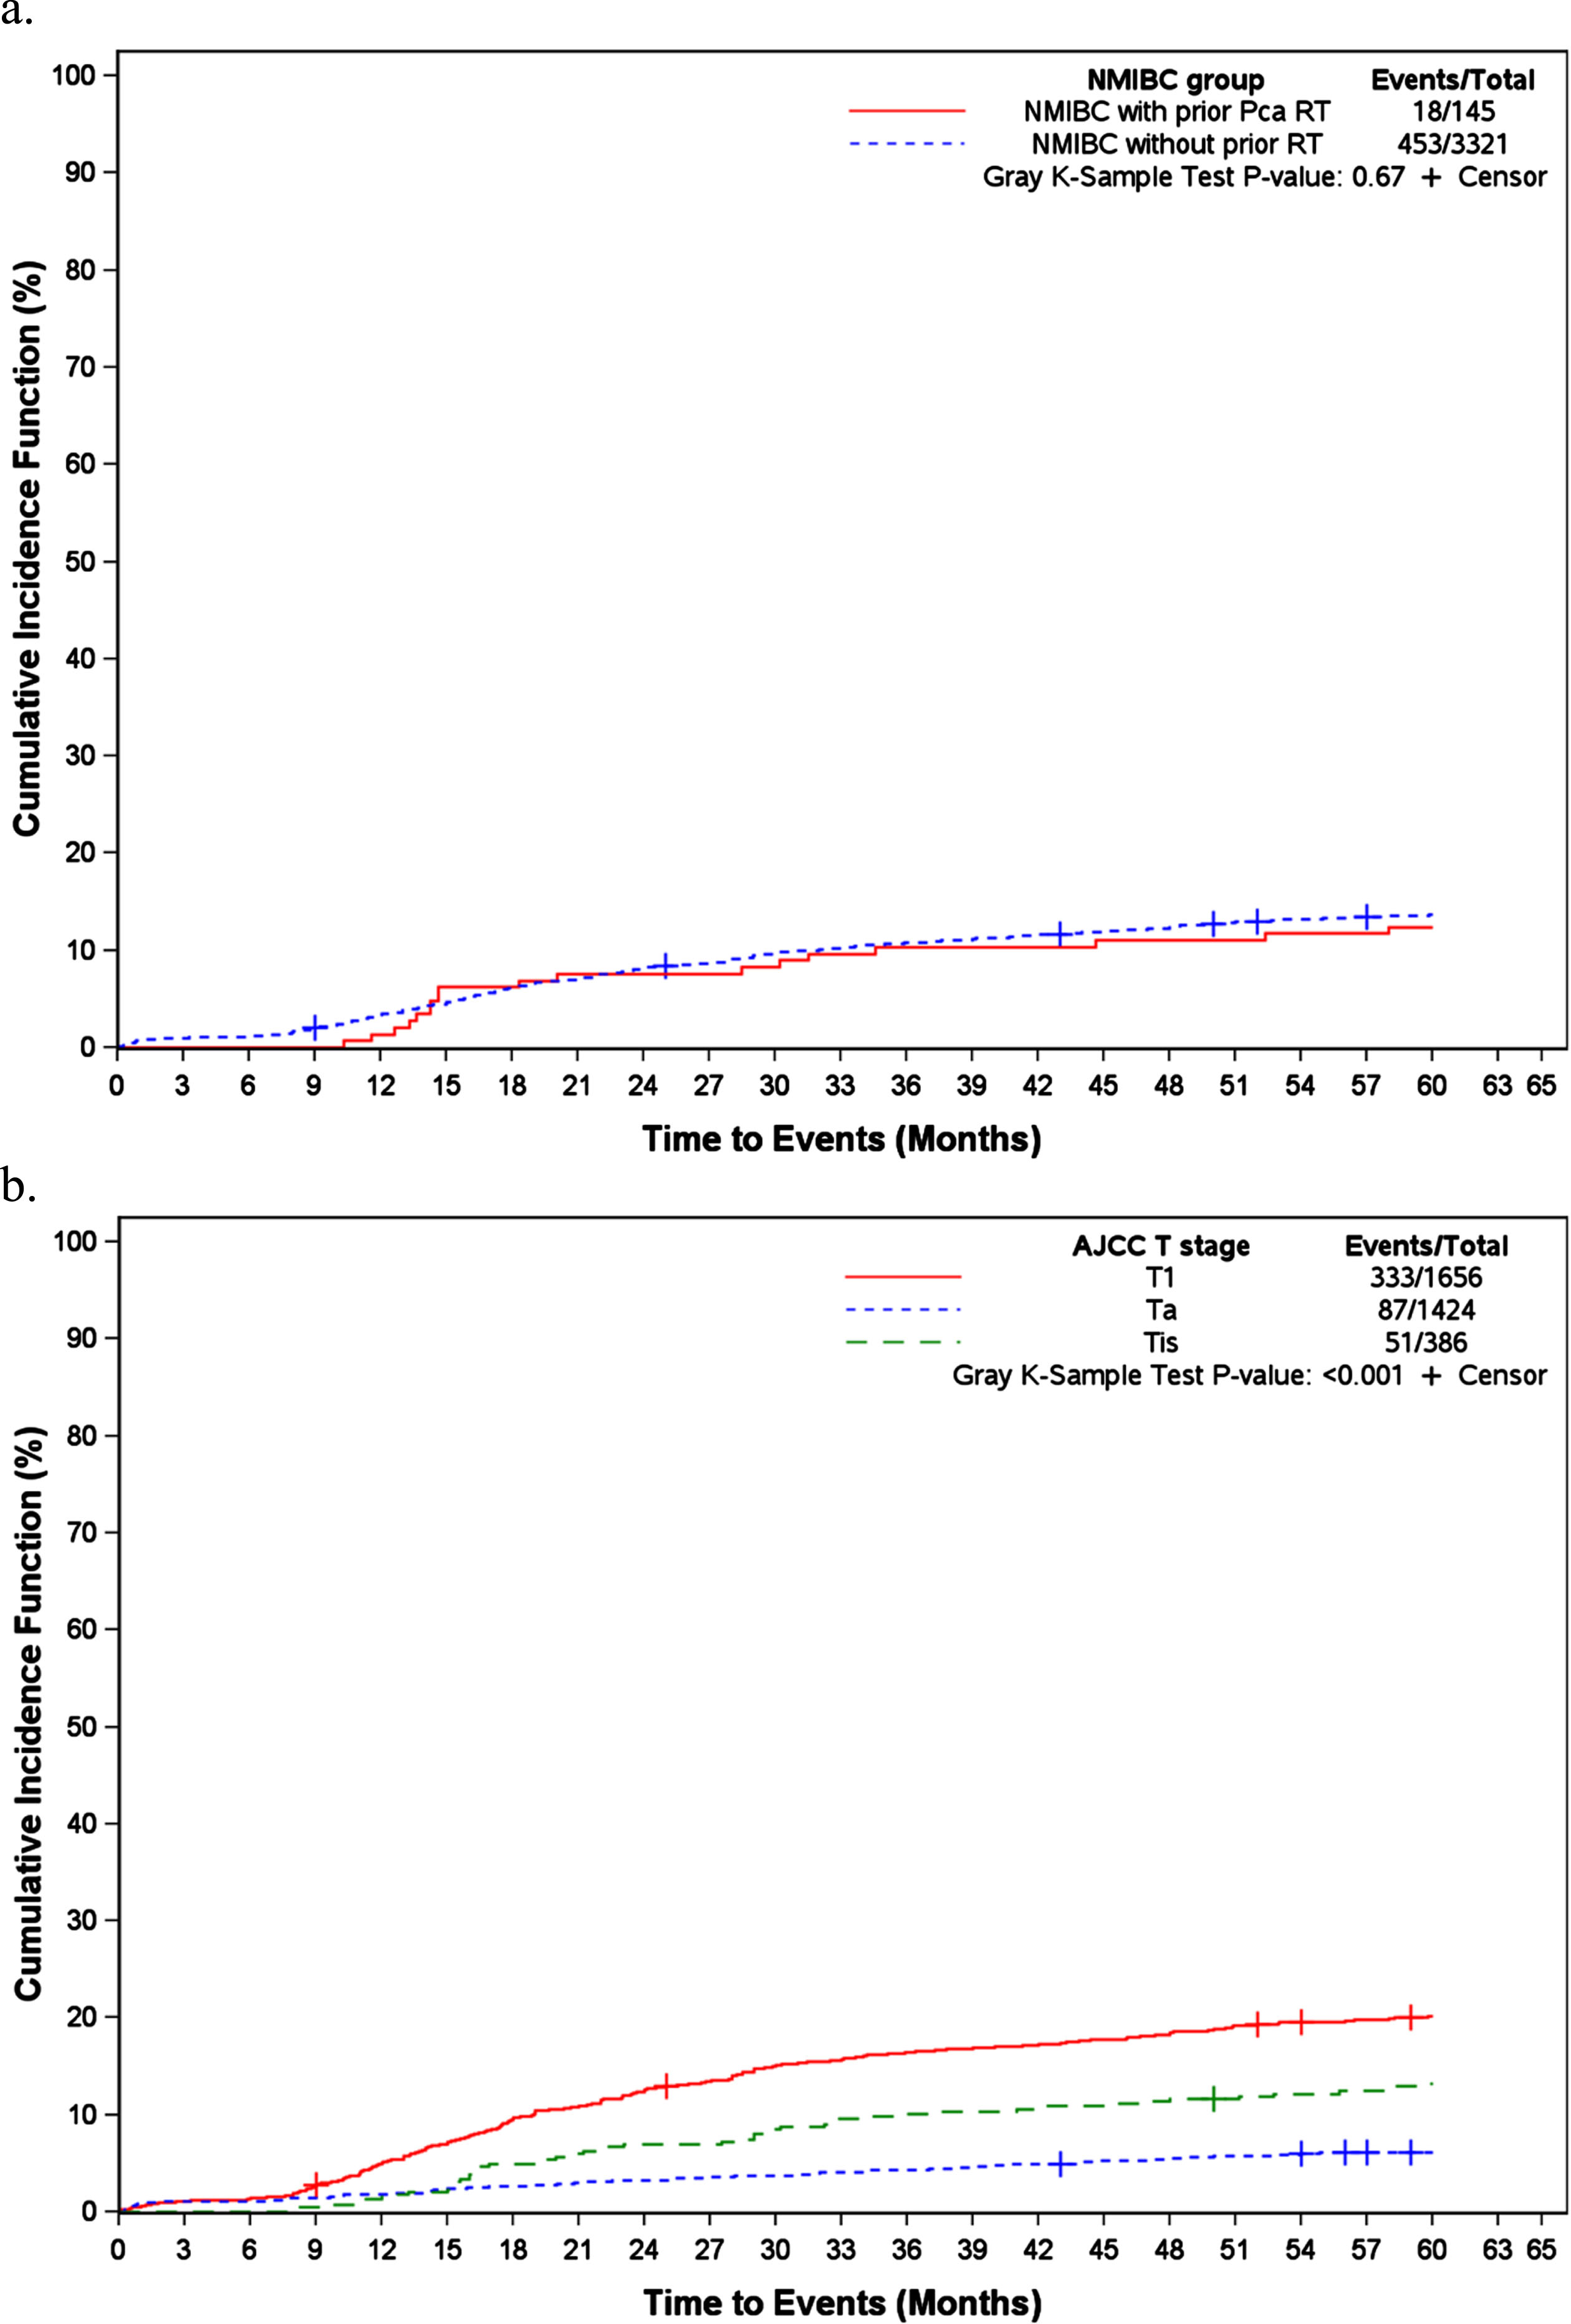 Cumulative Incidence Function of 5-Year Progression of NMIBC With Corresponding Plots at Each Time Point. A, NMIBC group. B, AJCC T stage. AJCC indicates American Joint Committee on Cancer; NMIBC, non–muscle-invasive bladder cancer; PCa, prostate cancer; RT, radiation therapy.